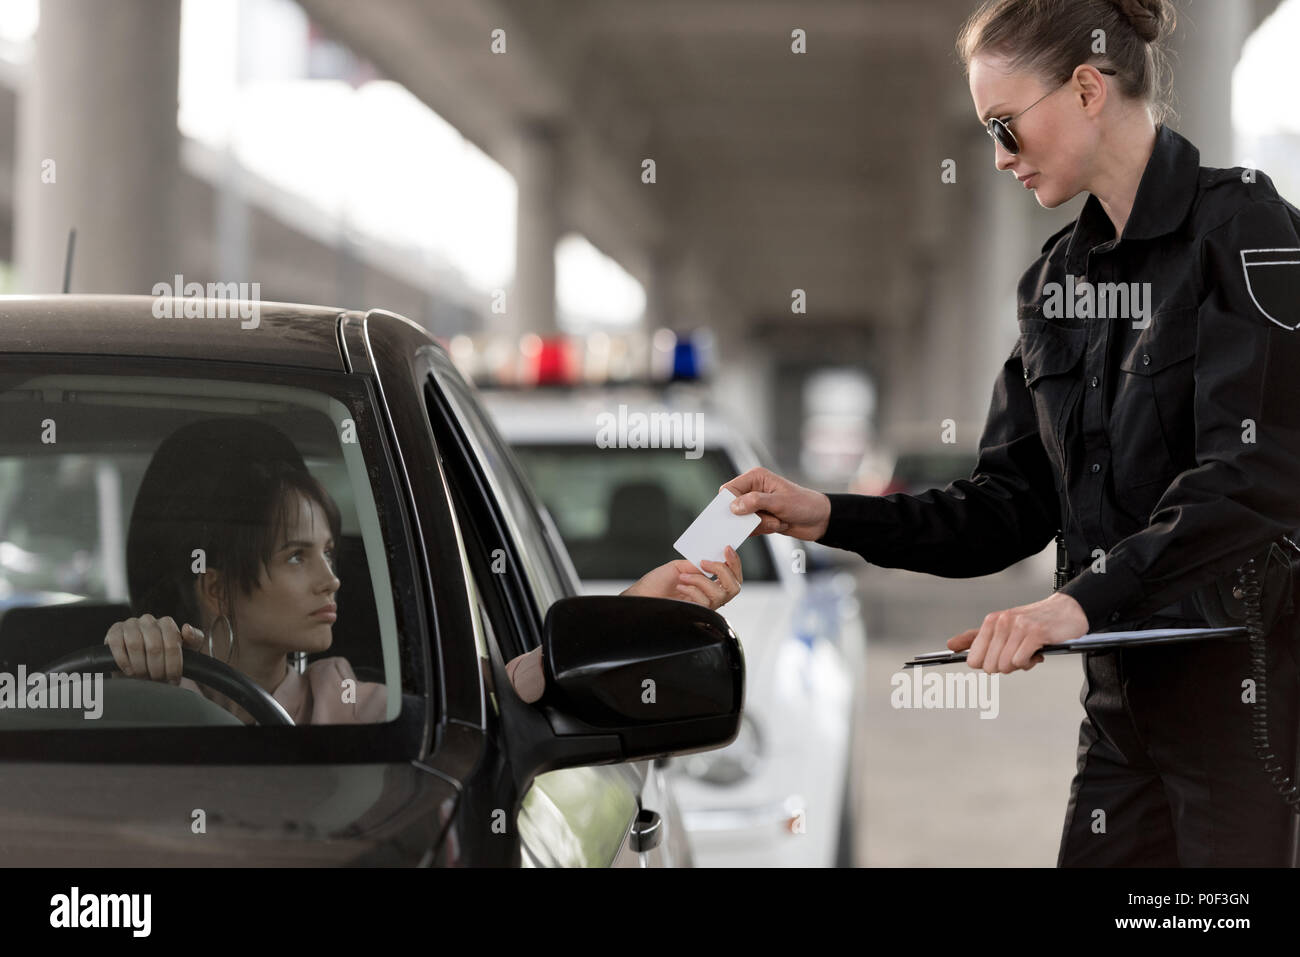 young woman in car giving driver license to policewoman in sunglasses Stock Photo